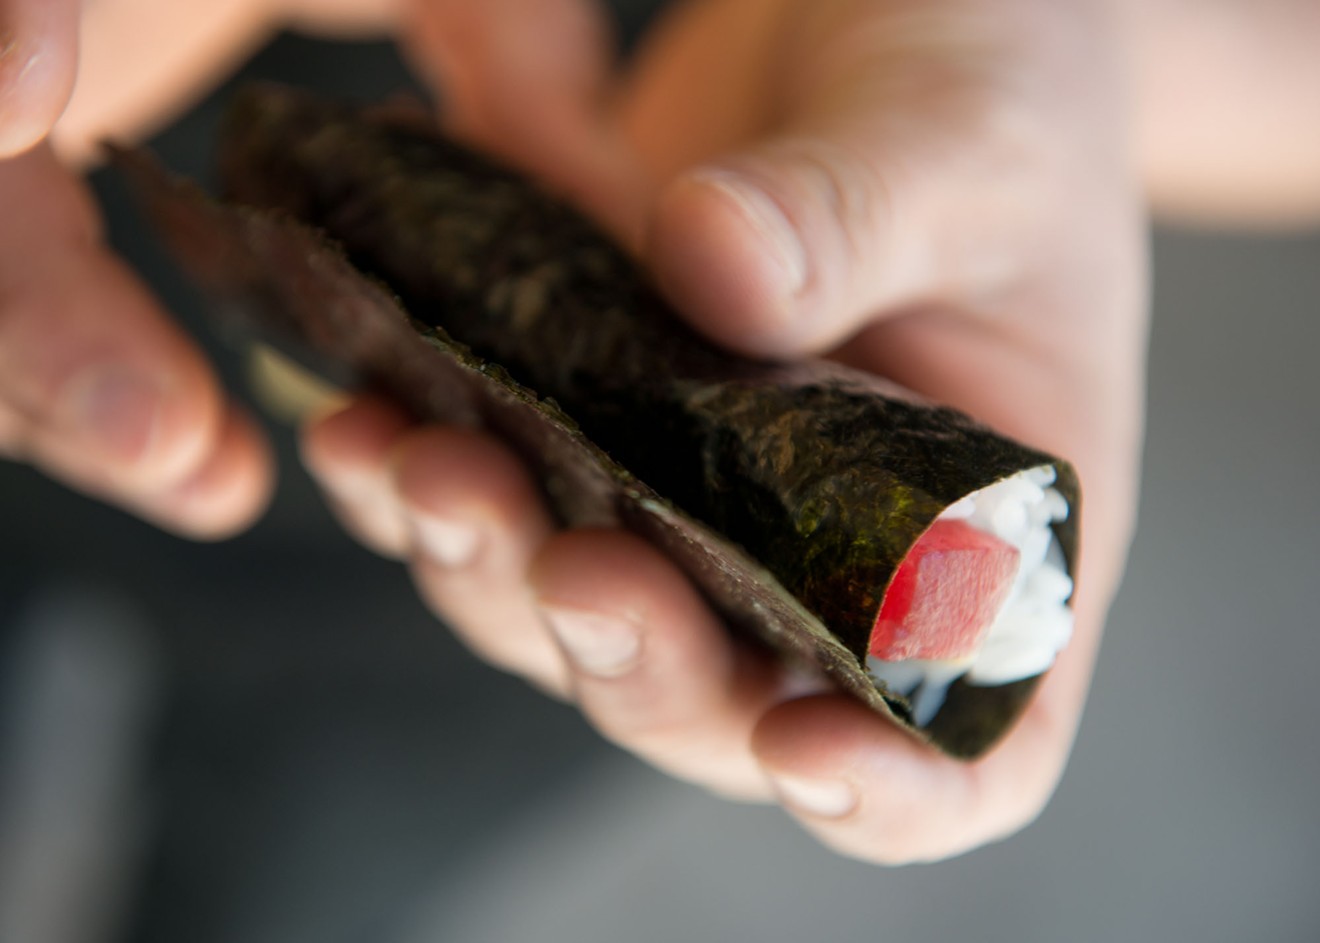 Two new Dallas handroll bars, Nori Handroll Bar and Namo (pictured), are duking it out in Dallas' growing temaki scene.